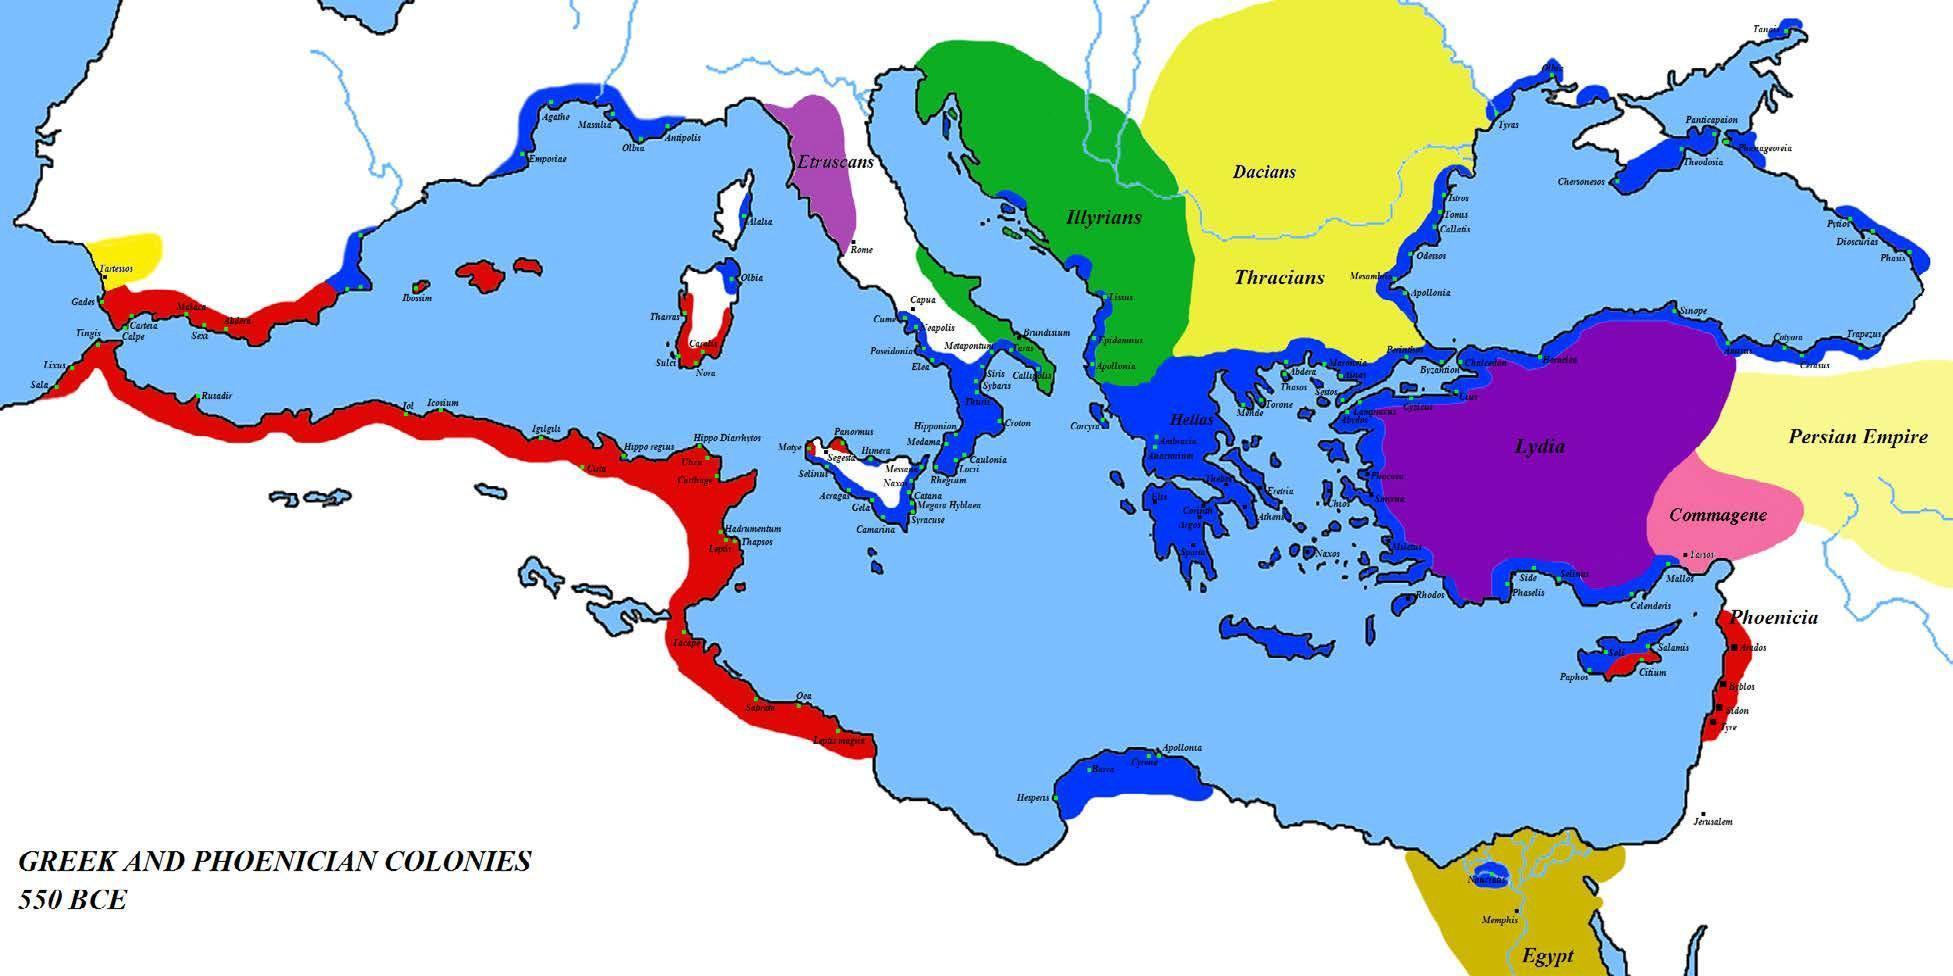 Map of the Greek (blue areas) and Phoenician city-states and colonies (red areas) c. 550 BCE